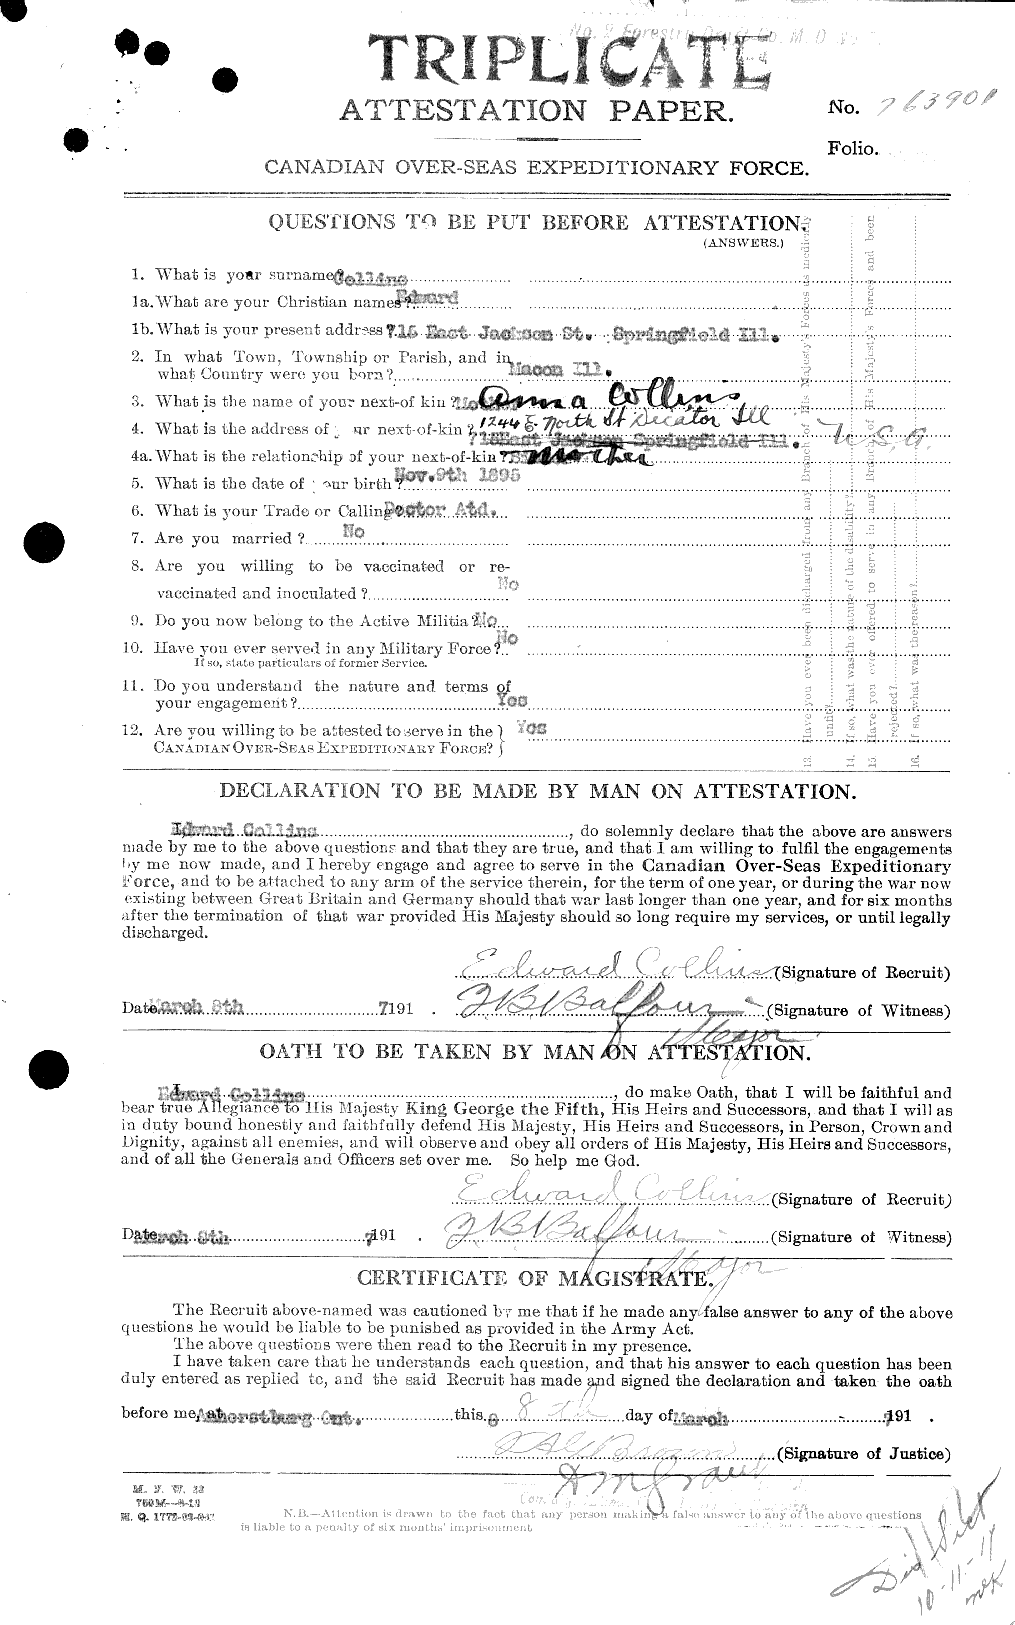 Personnel Records of the First World War - CEF 037740a